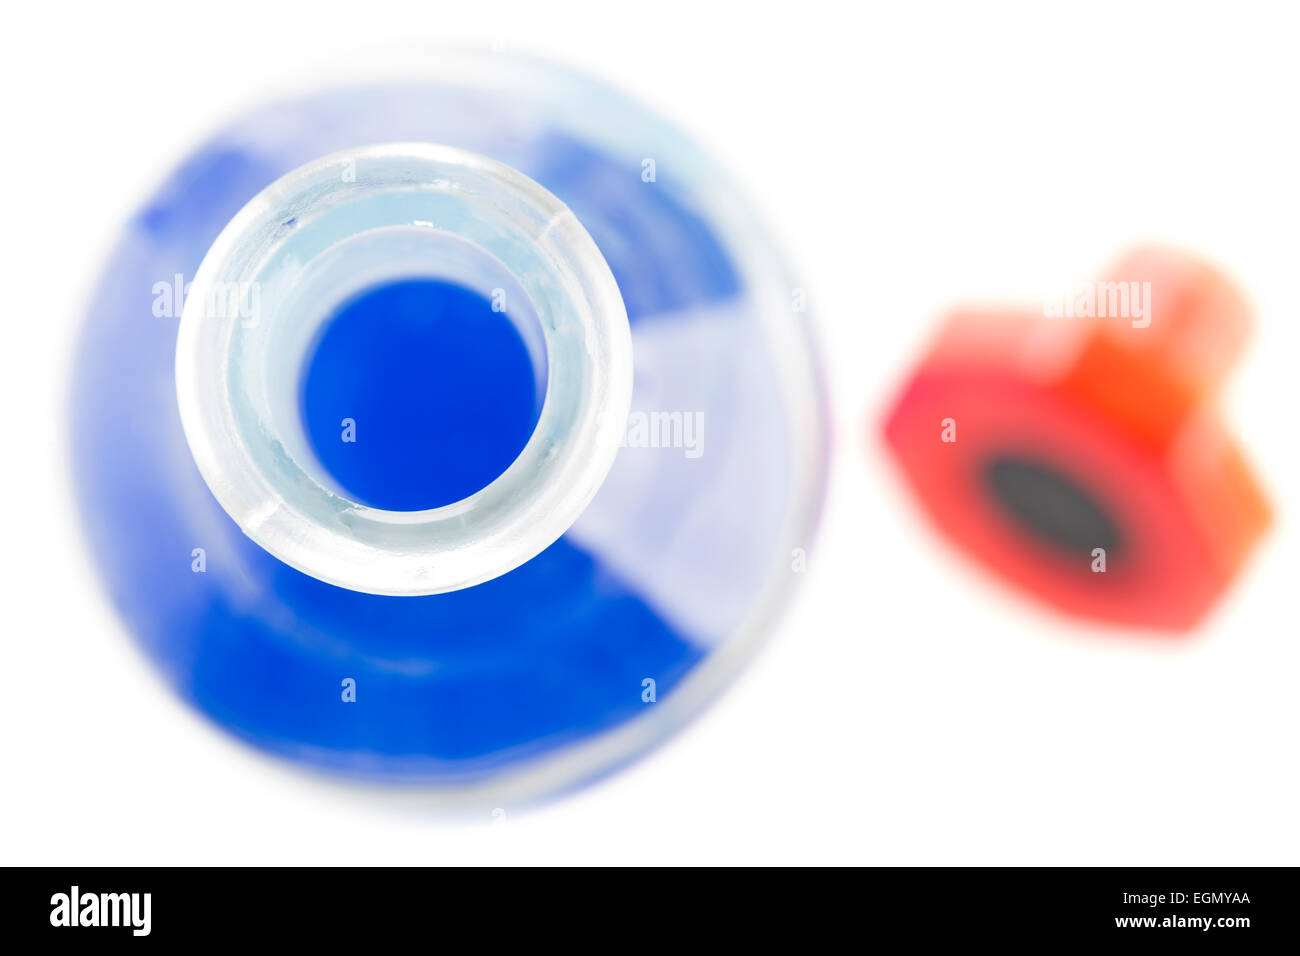 Bottle with blue Liquid from above, with red stopper out of focus. Stock Photo